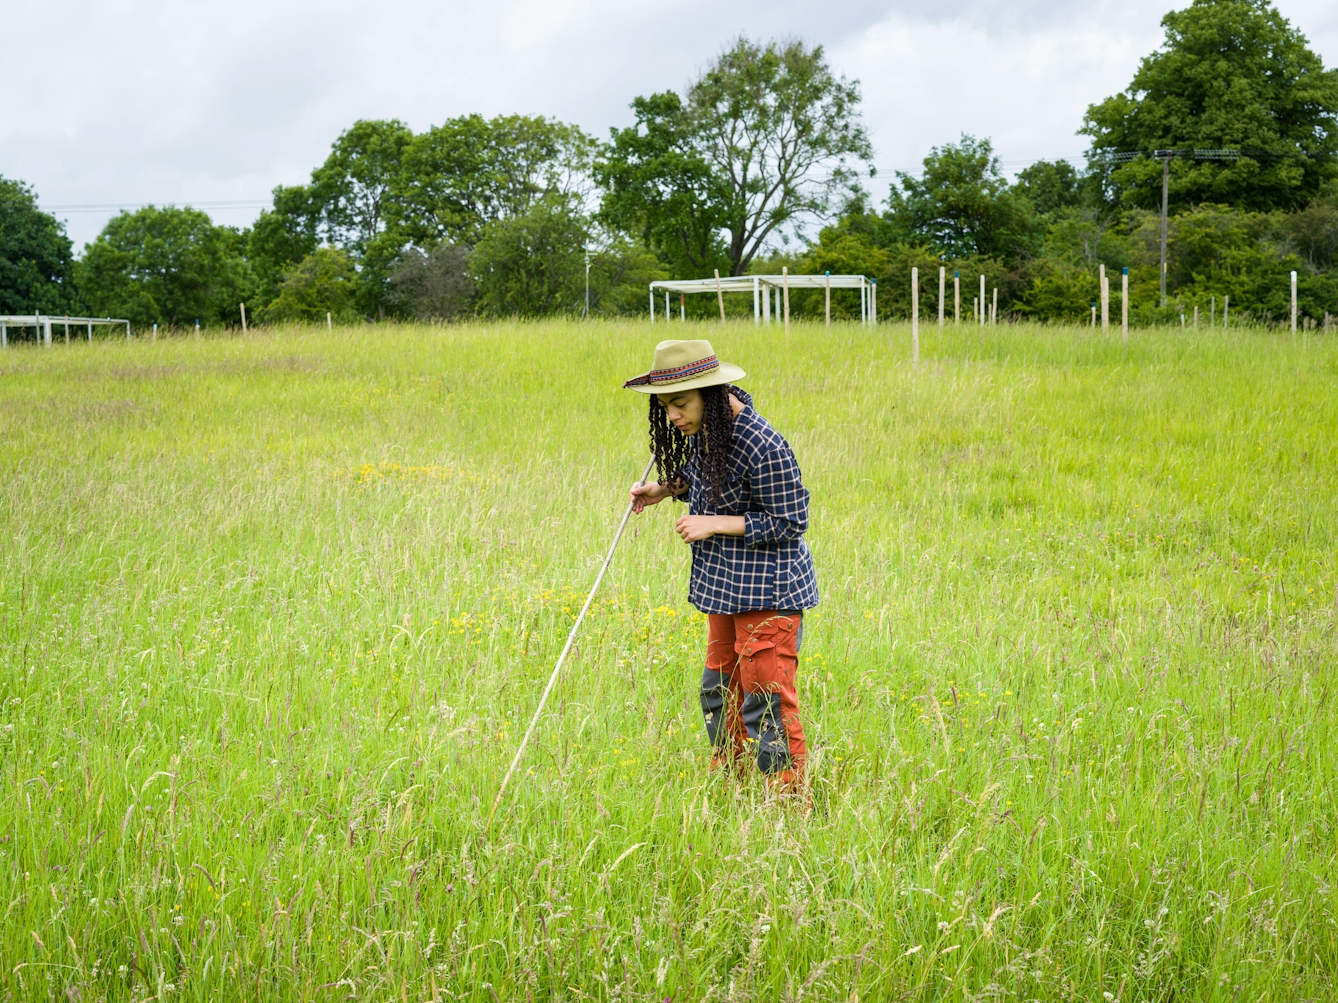 Colour photograph of a young woman wearing a brimmed hat, checked shirt and red trousers standing in a wild grassland meadow. She is holding a long bamboo stick which she is using to separate the grasses as she peers down into the undergrowth. Behind her in the distance is a tree lined border with a series of man made metal and wood framed structures.